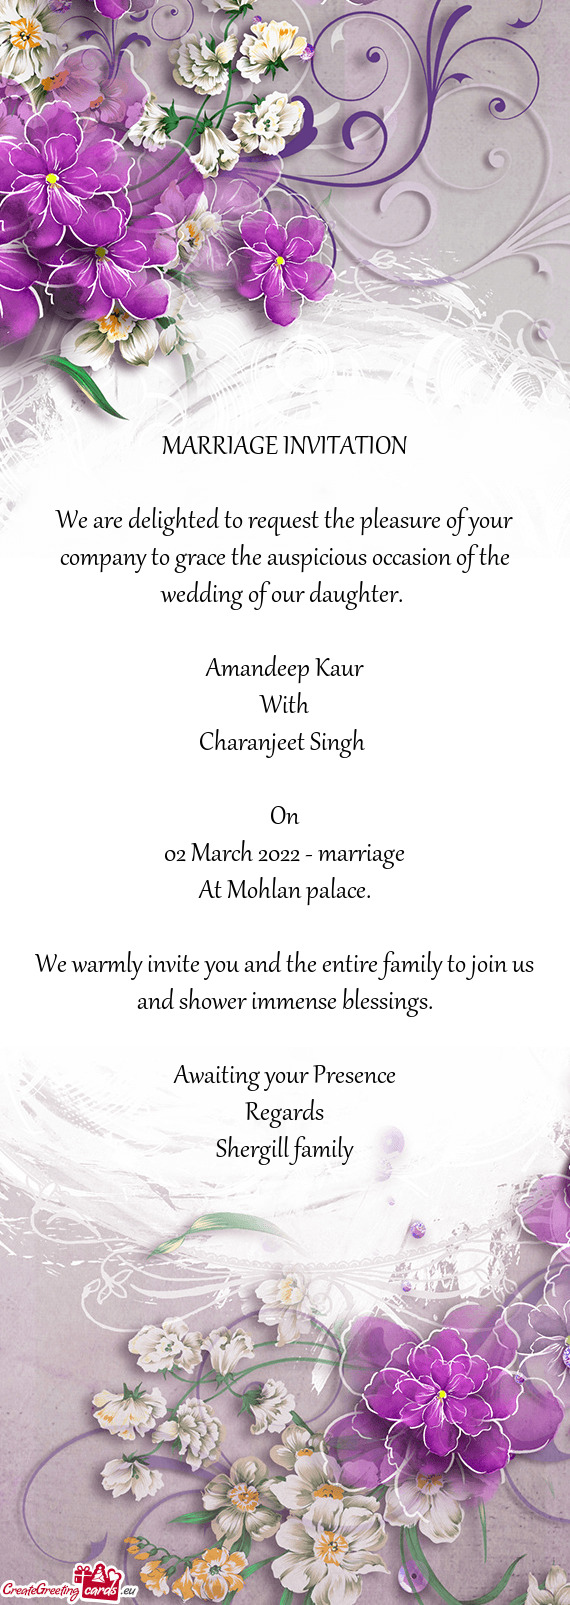 02 March 2022 - marriage